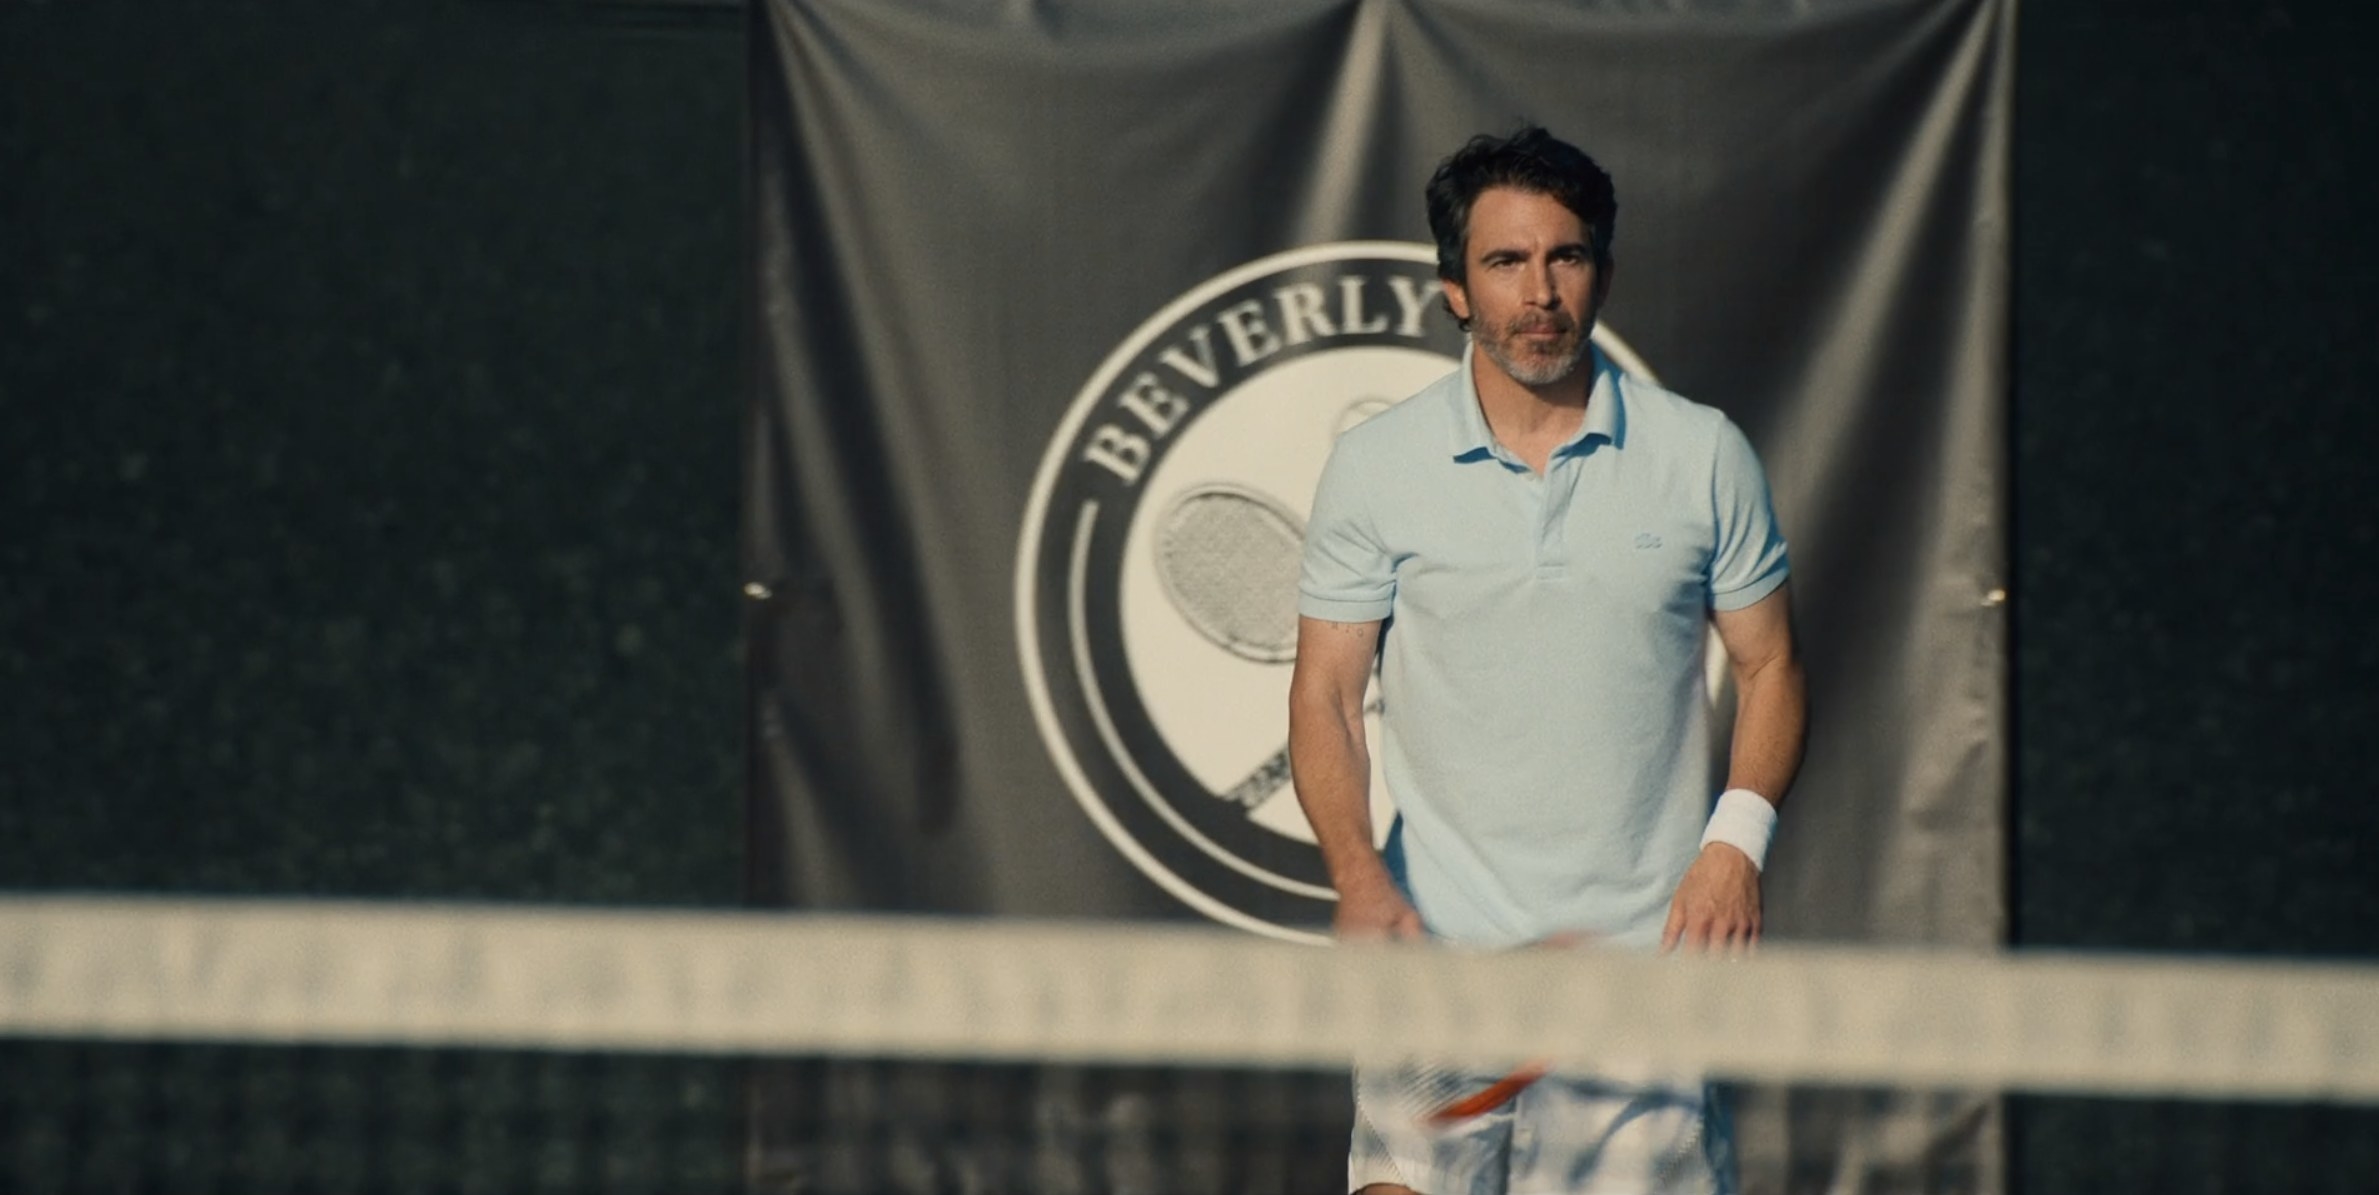 chris messina playing tennis in based on a true story